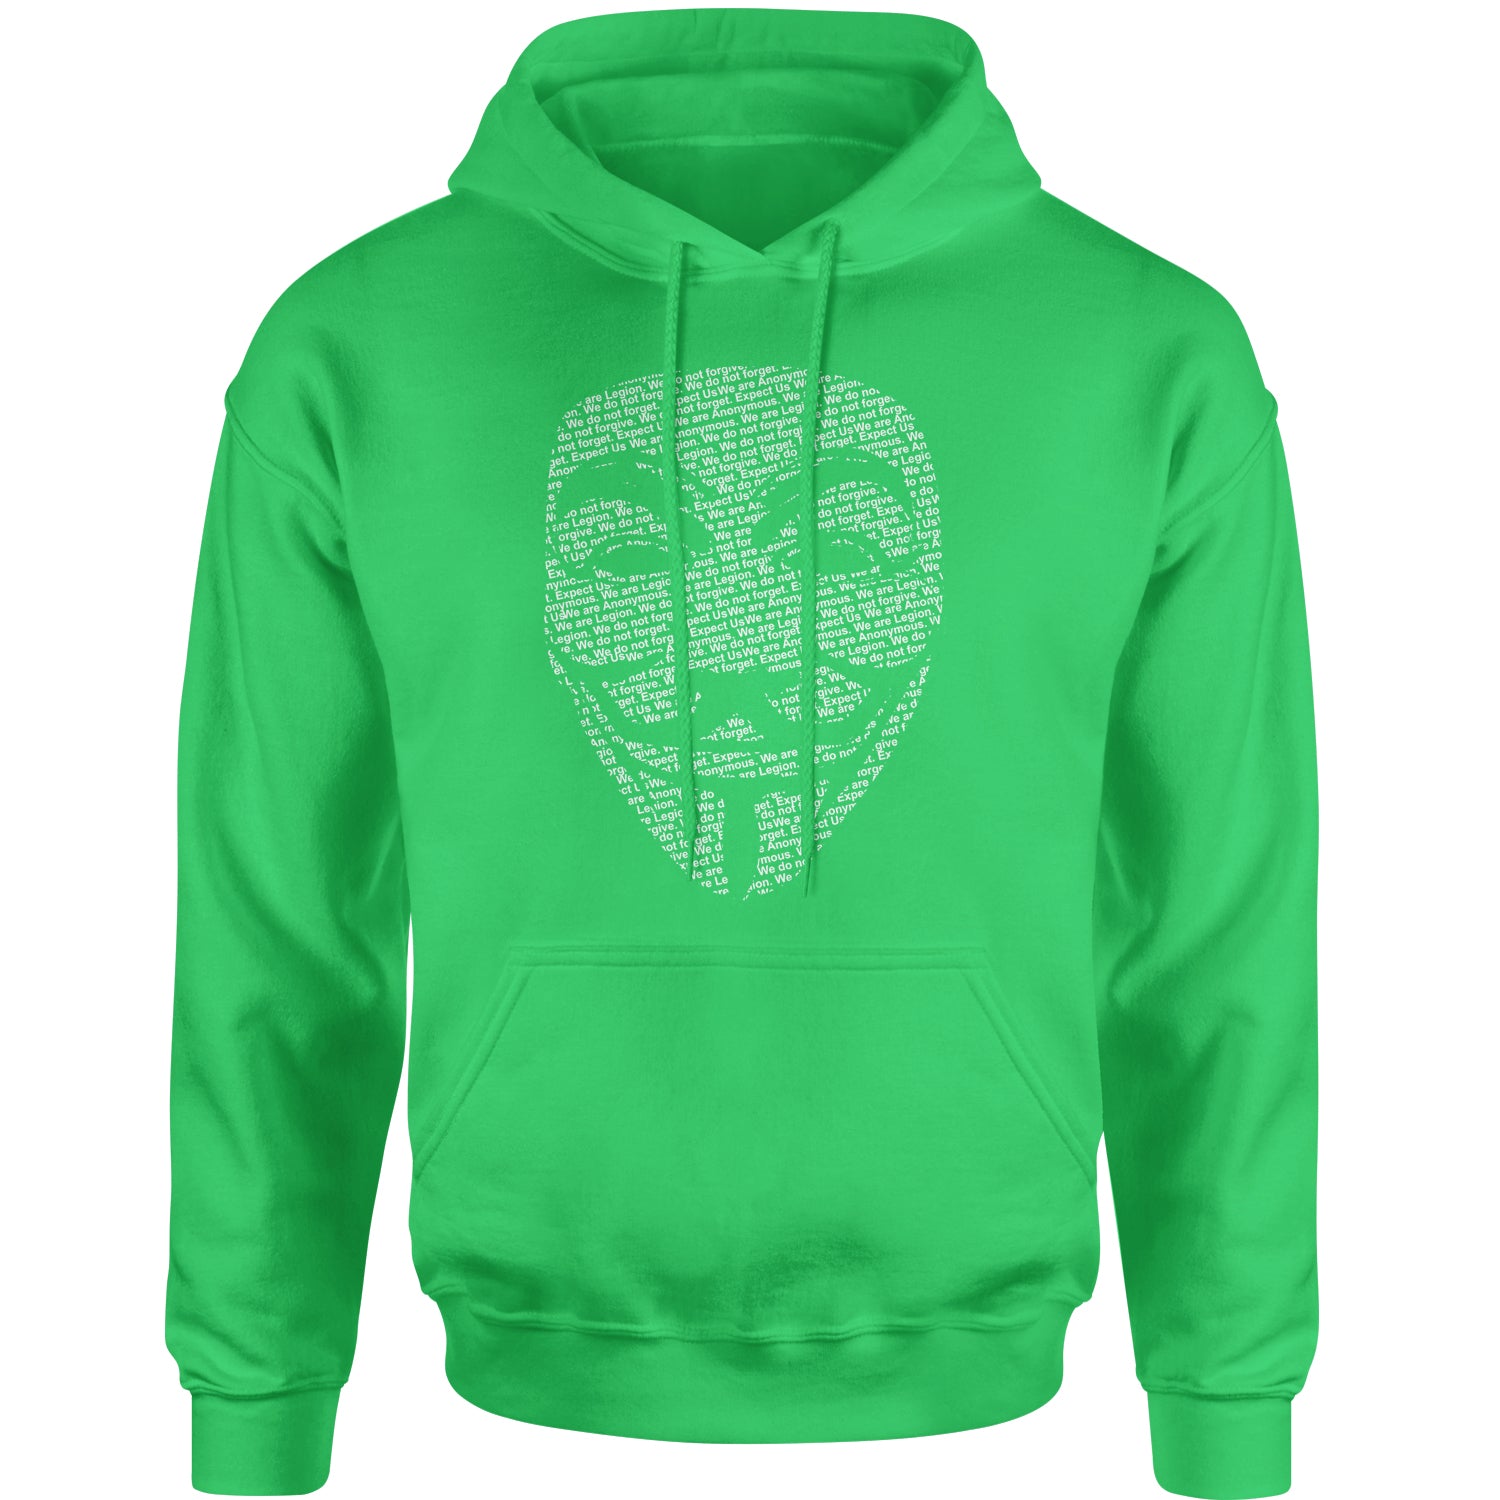 V For Vendetta Anonymous Mask Adult Hoodie Sweatshirt #expressiontees by Expression Tees